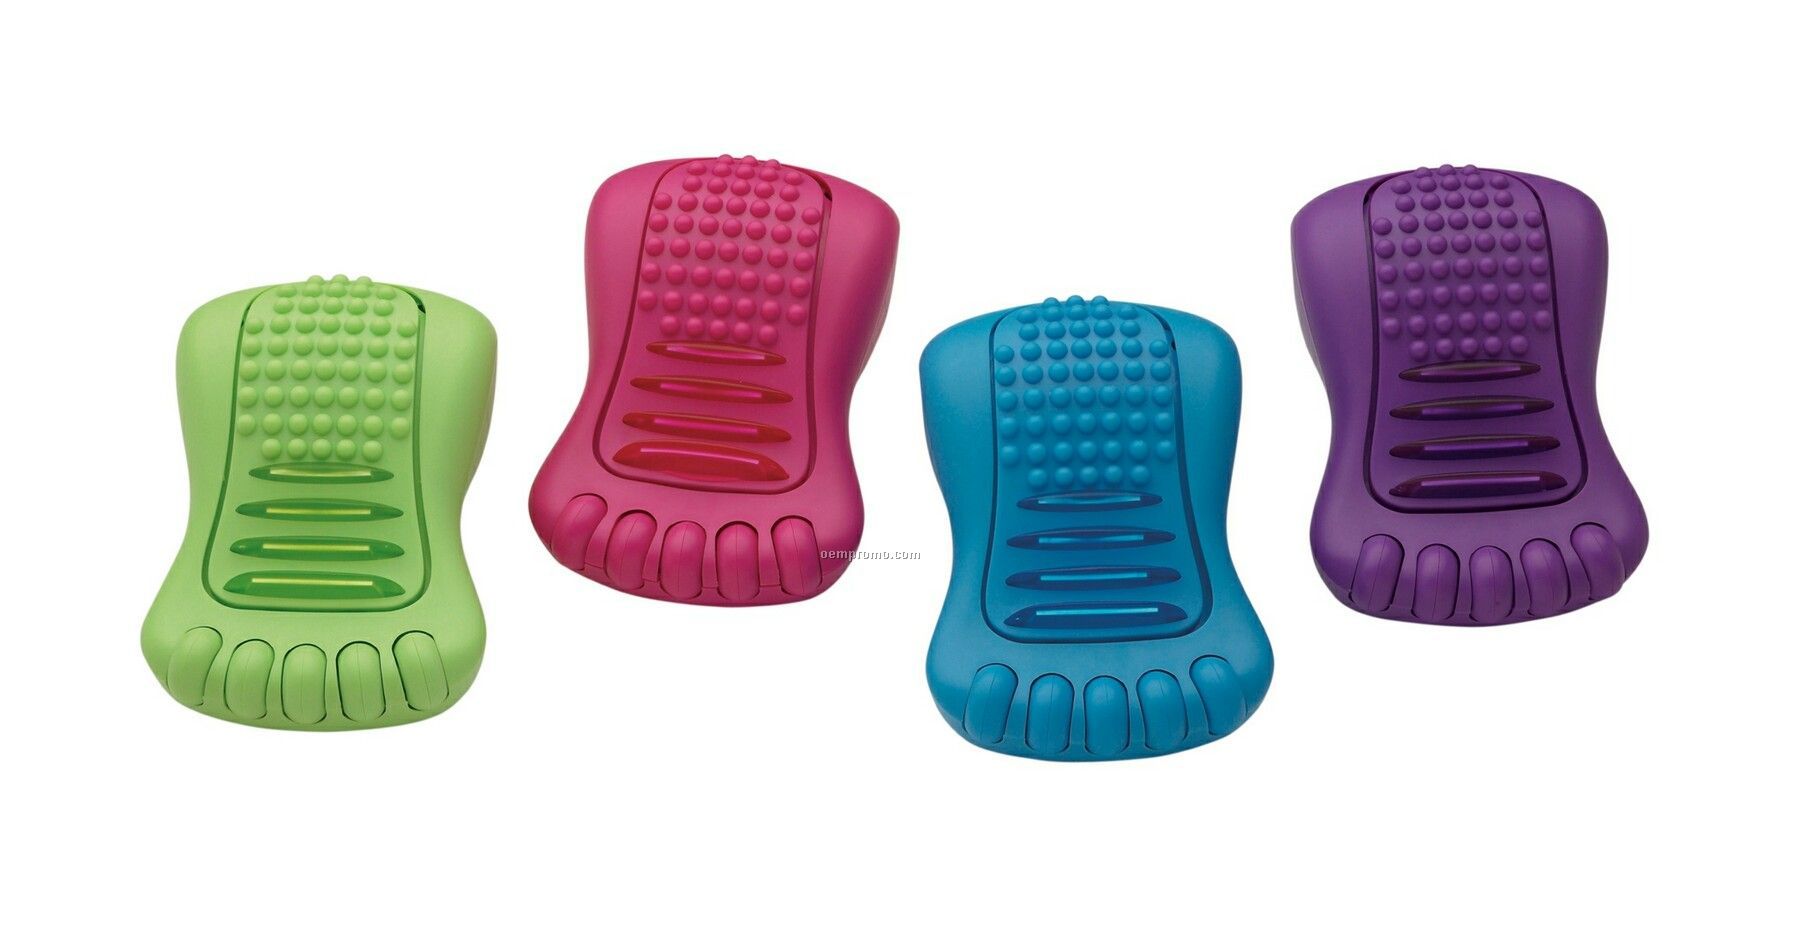 Dr. Scholls Mini Vibrating Foot Massager In Multiple/ Assorted Colors